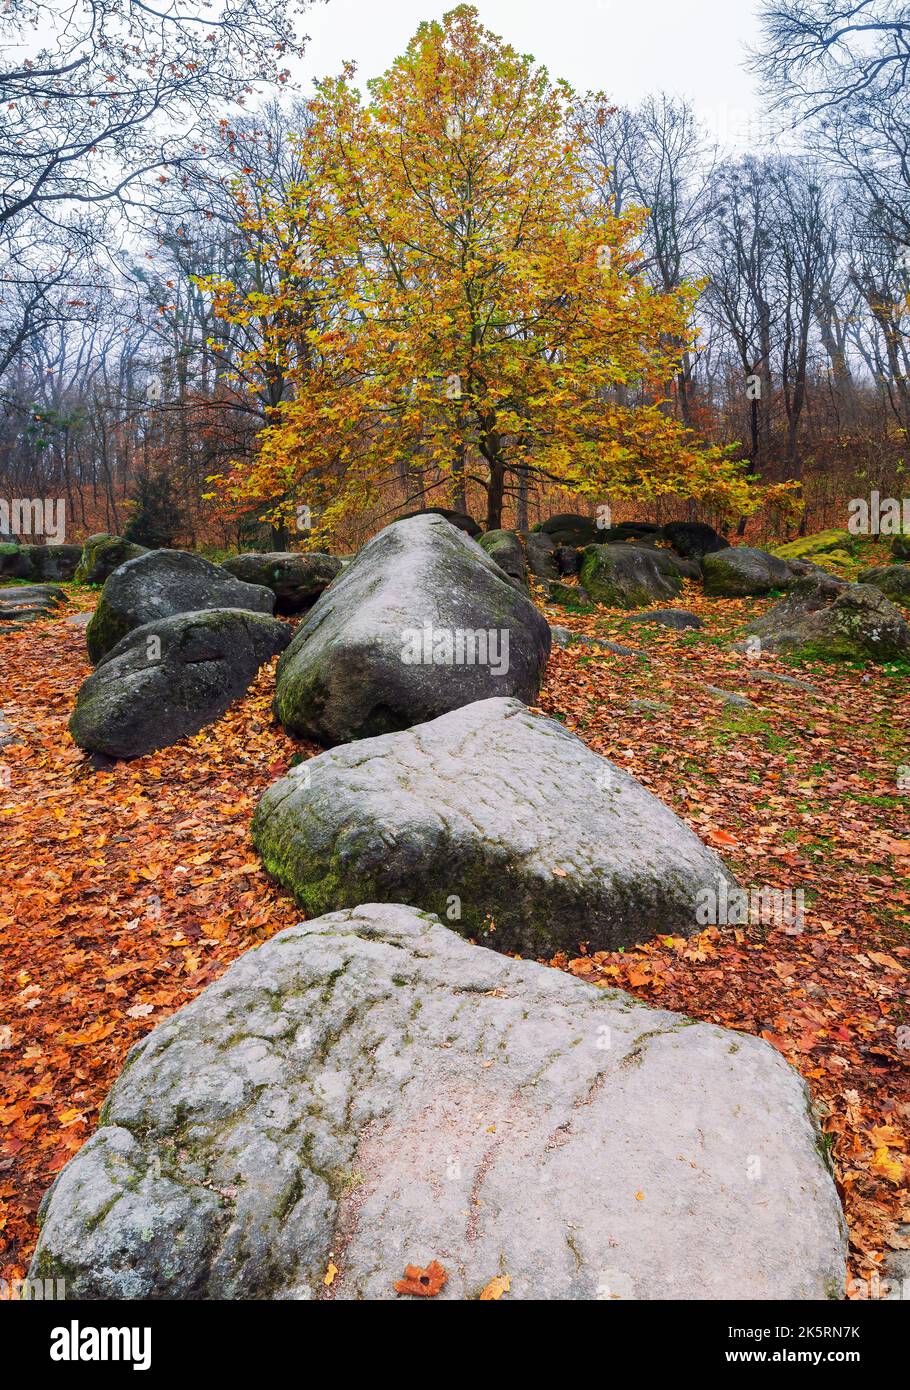 Stones covered by carpet of fallen autumn leaves. Picturesque scene in the autumn park. Stock Photo